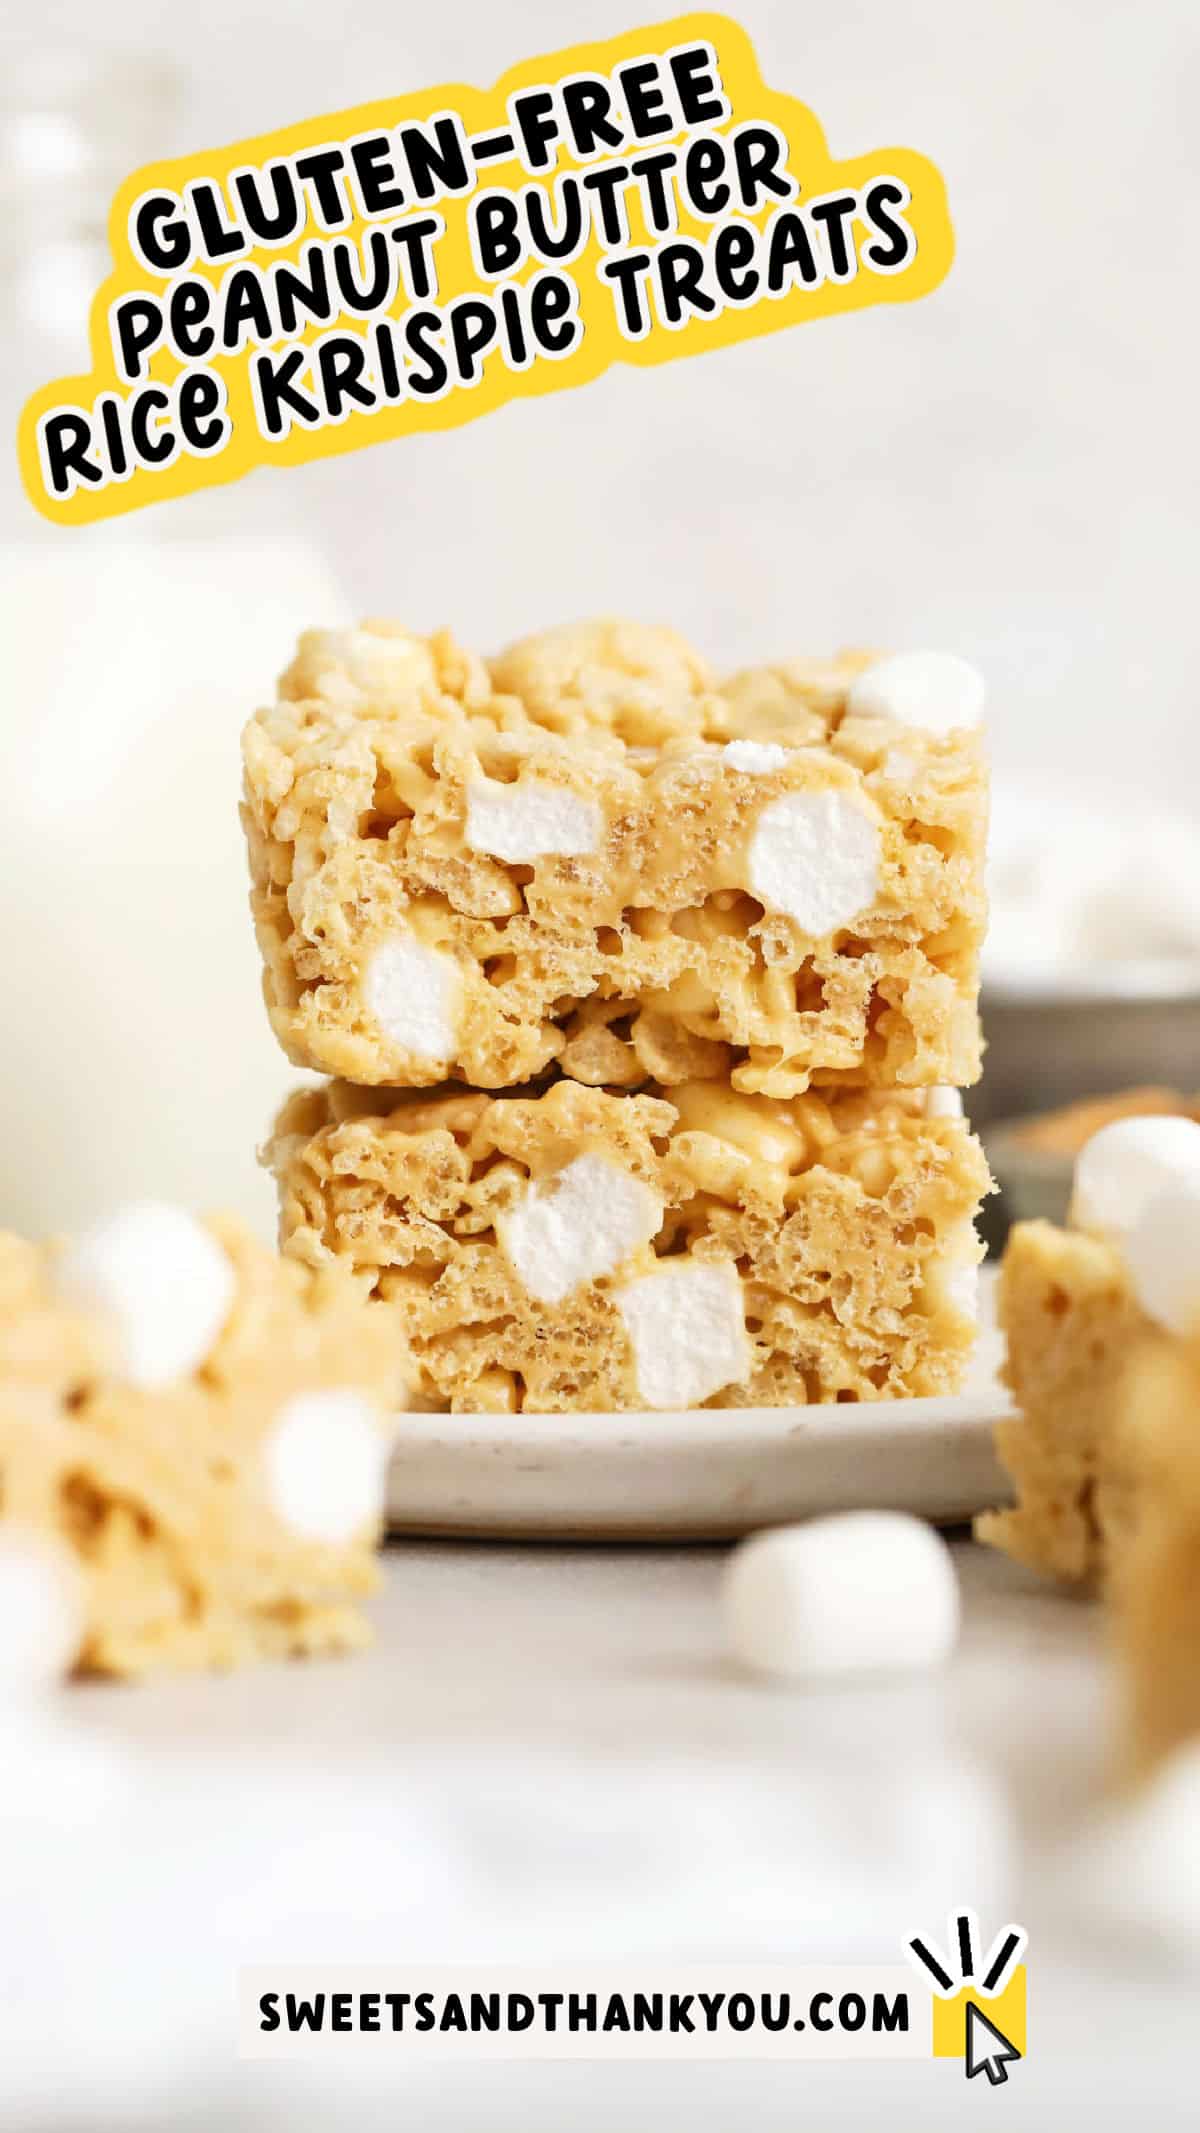 Calling all peanut butter lovers! These gooey gluten-free peanut butter rice krispie treats are the perfect recipe when you want an easy crowd-pleasing dessert. This no-bake dessert combines gluten-free crisp rice cereal, melted marshmallows, peanut butter, vanilla, salt, and butter to create a crispy gooey treat everyone will love. From tips on buying gluten-free crispy rice cereal, to fun mix-ins to add, don't miss our peanut butter rice krispies treats recipe!  